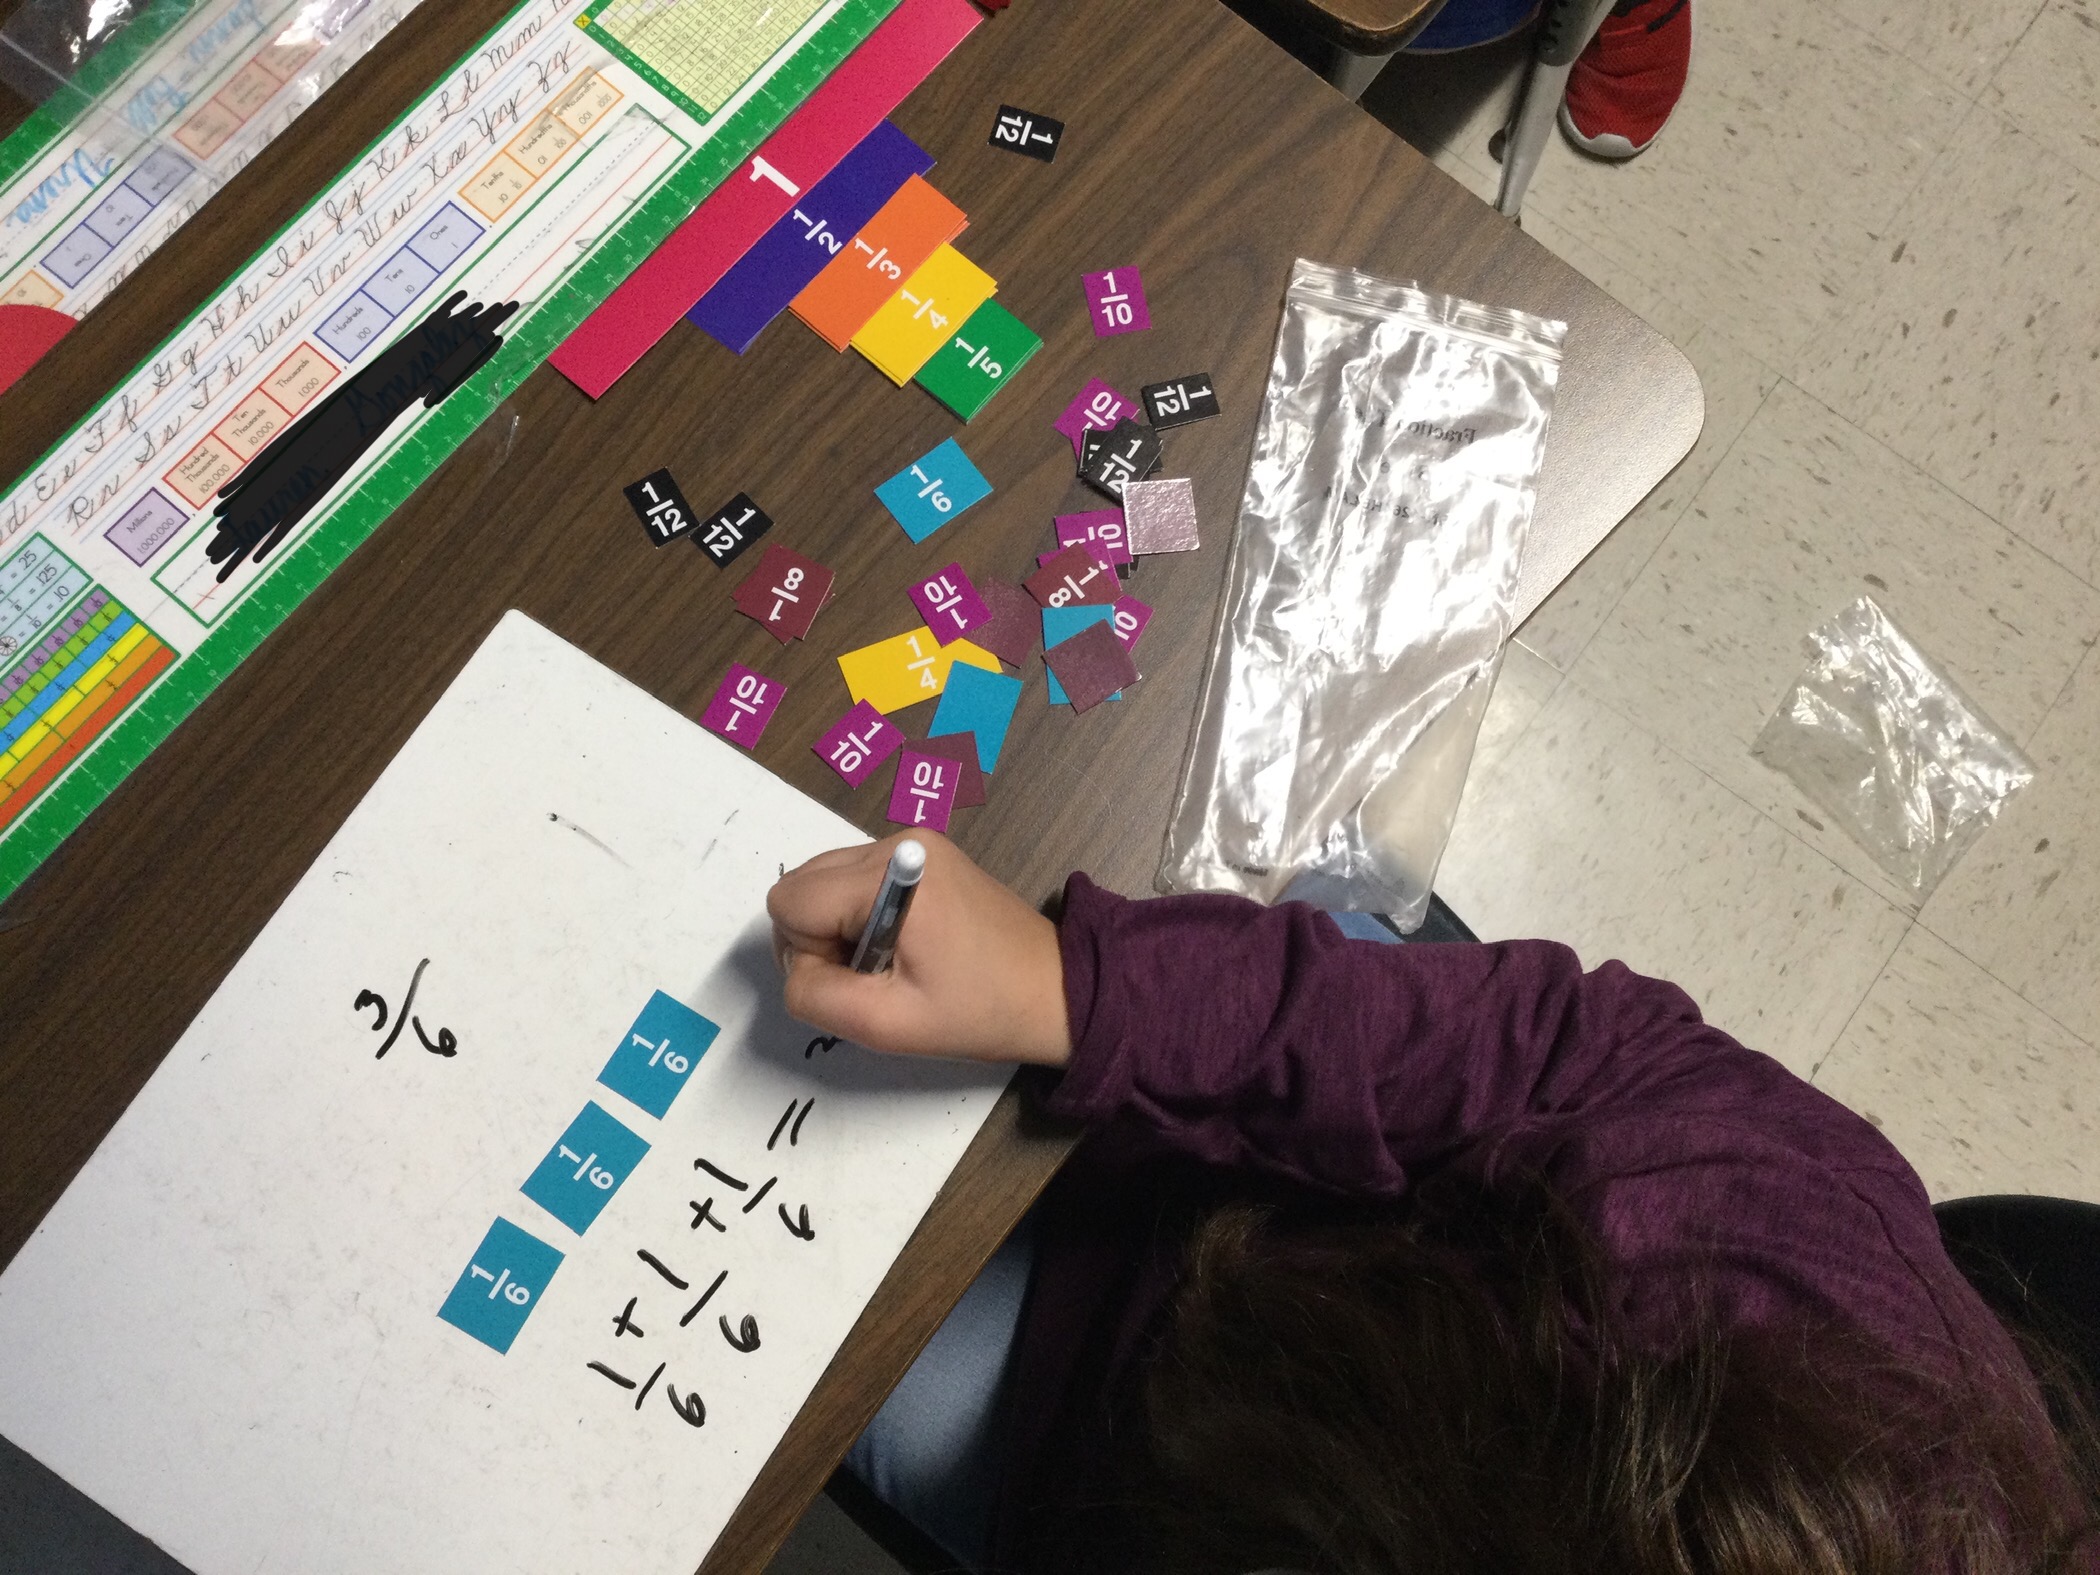 4th grade student working on fractions